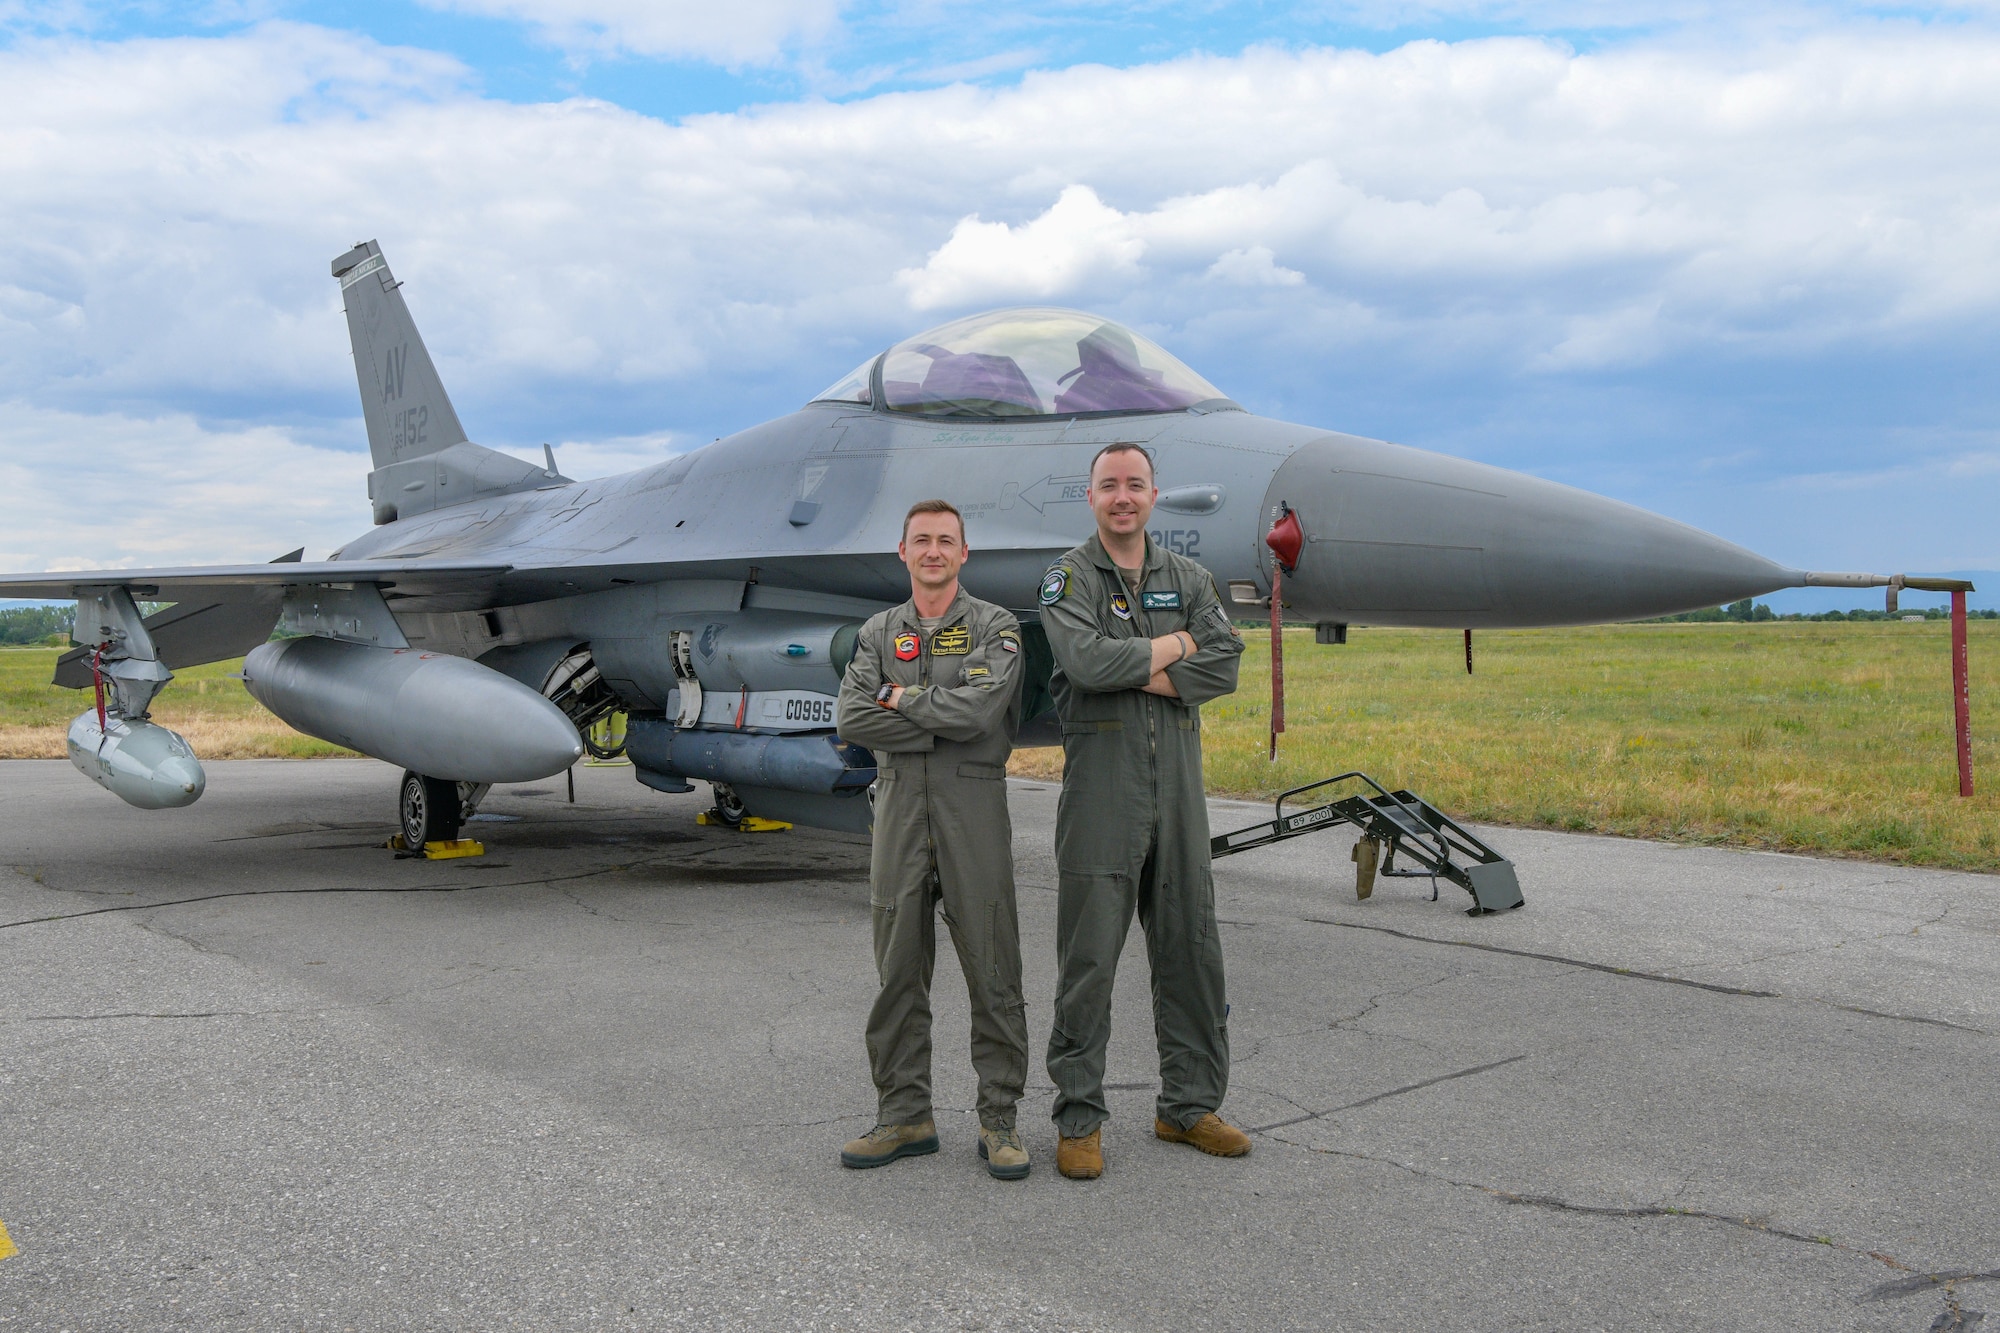 U.S. Air Force Capt. Justin Goar, 555th Fighter Squadron F-16 Fighting Falcon pilot, left, and Bulgarian air force Maj. Petar Milkov, L-39 Albatros instructor, pose for a photo during exercise Thracian Star 21 at Graf Ingatievo Air Base, Bulgaria, July 22, 2021. Thracian Star 21 is a multilateral training exercise with the Bulgarian air force that increases operational capacity, capability and interoperability with Bulgaria. (U.S. Air Force photo by Airman 1st Class Brooke Moeder)